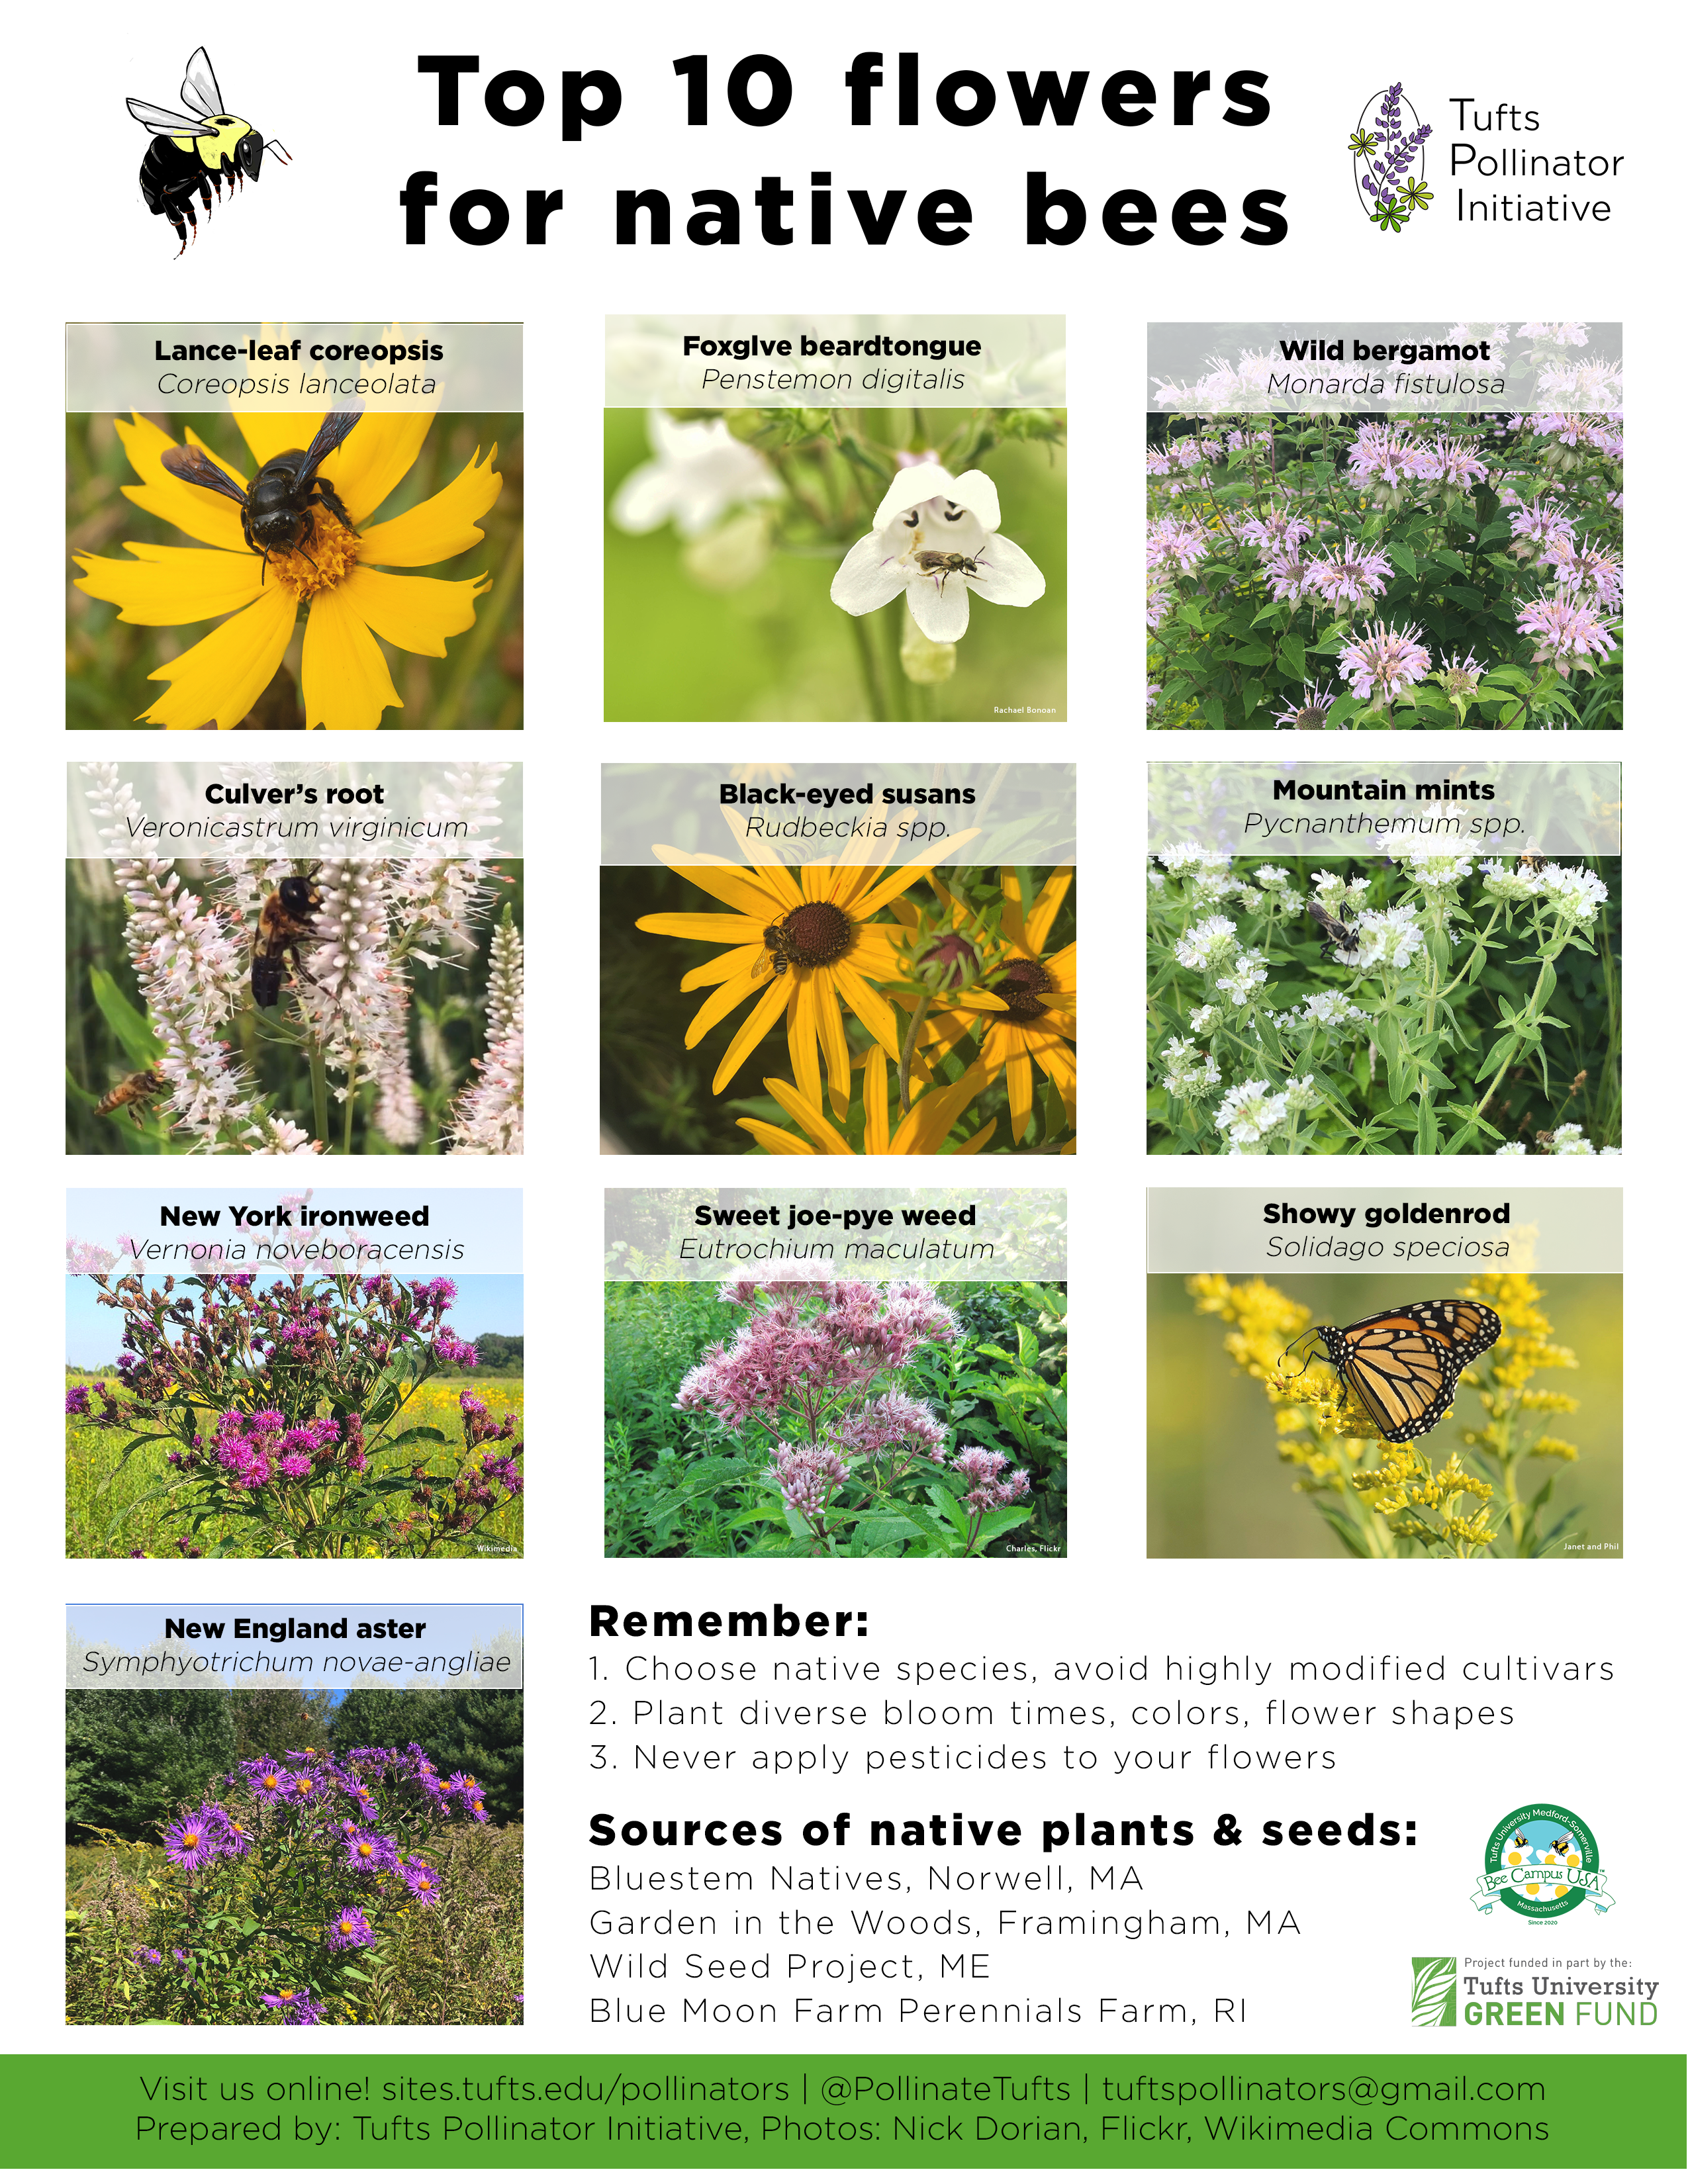 III. Why Native Plants are Essential for Bees